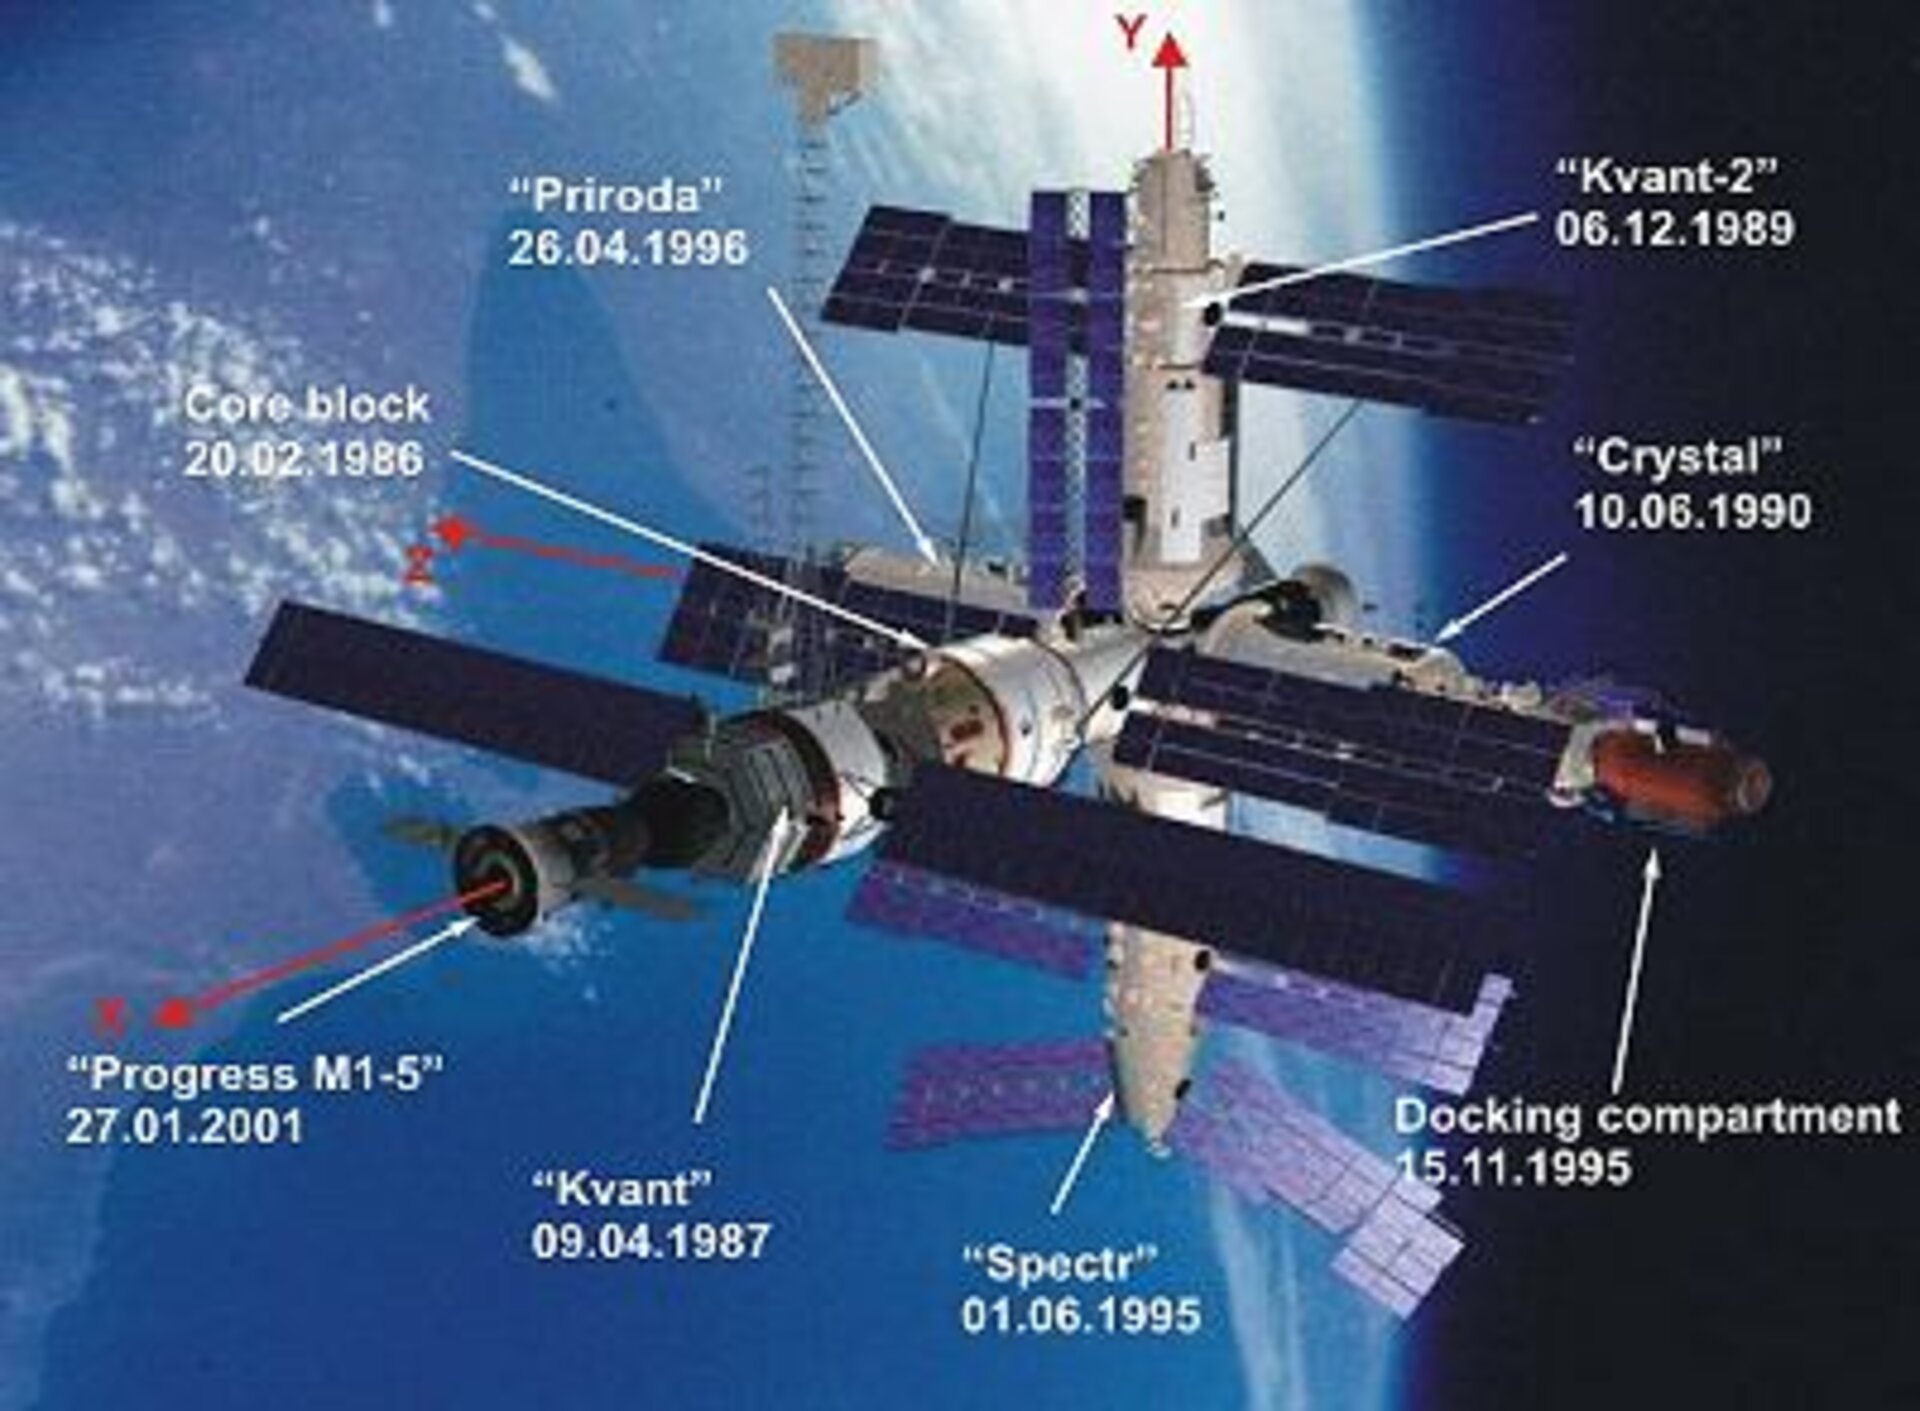 ESA - Mir FAQs - Facts and history